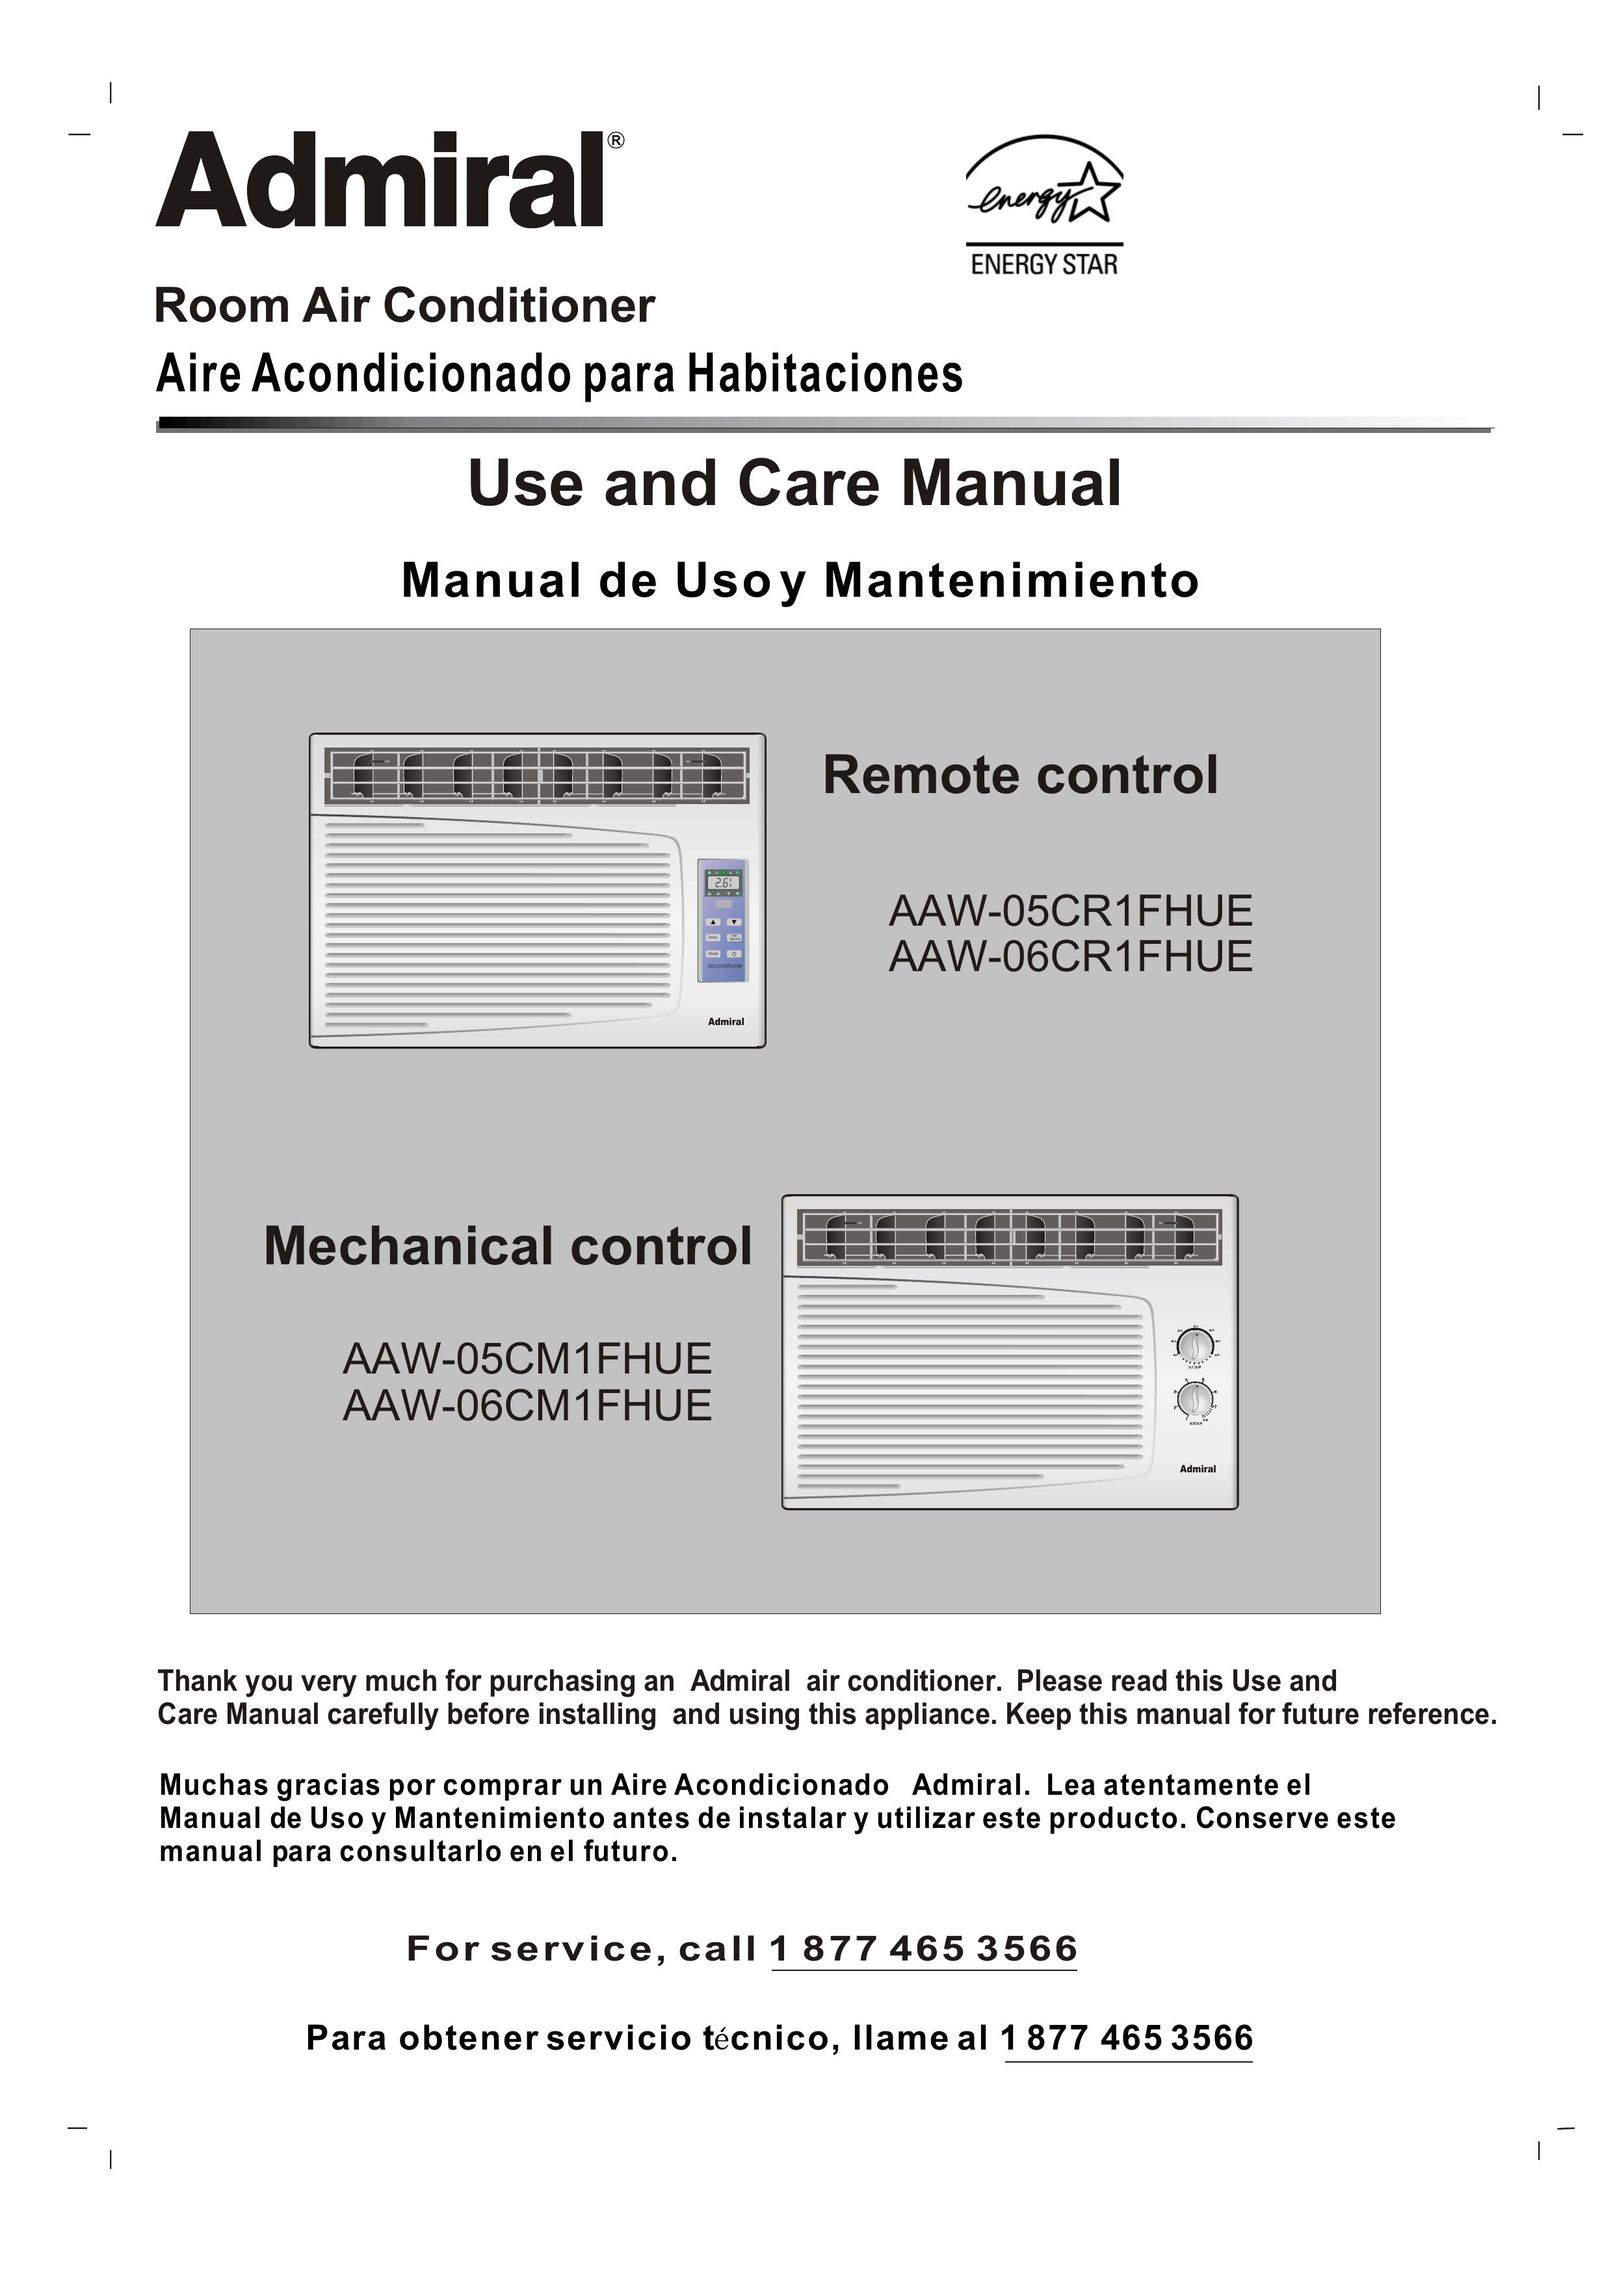 Admiral AAW-06CR1FHUE Air Conditioner User Manual (Page 1)